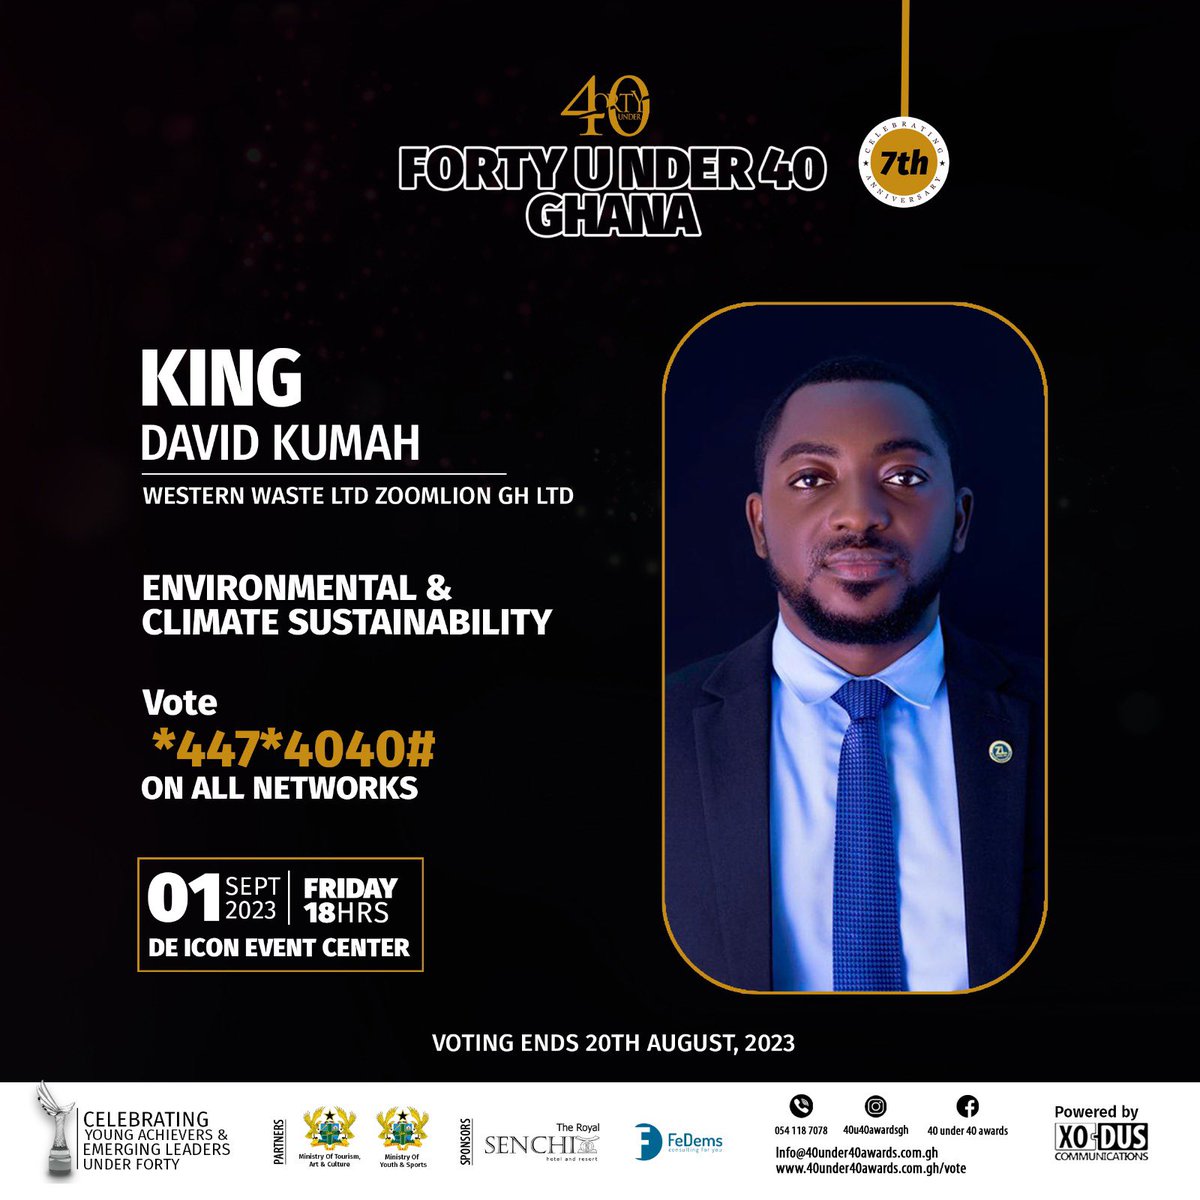 Kindly dial the shortcode and vote

#sweatsandefforts
#40under40awards
#40under40nominee